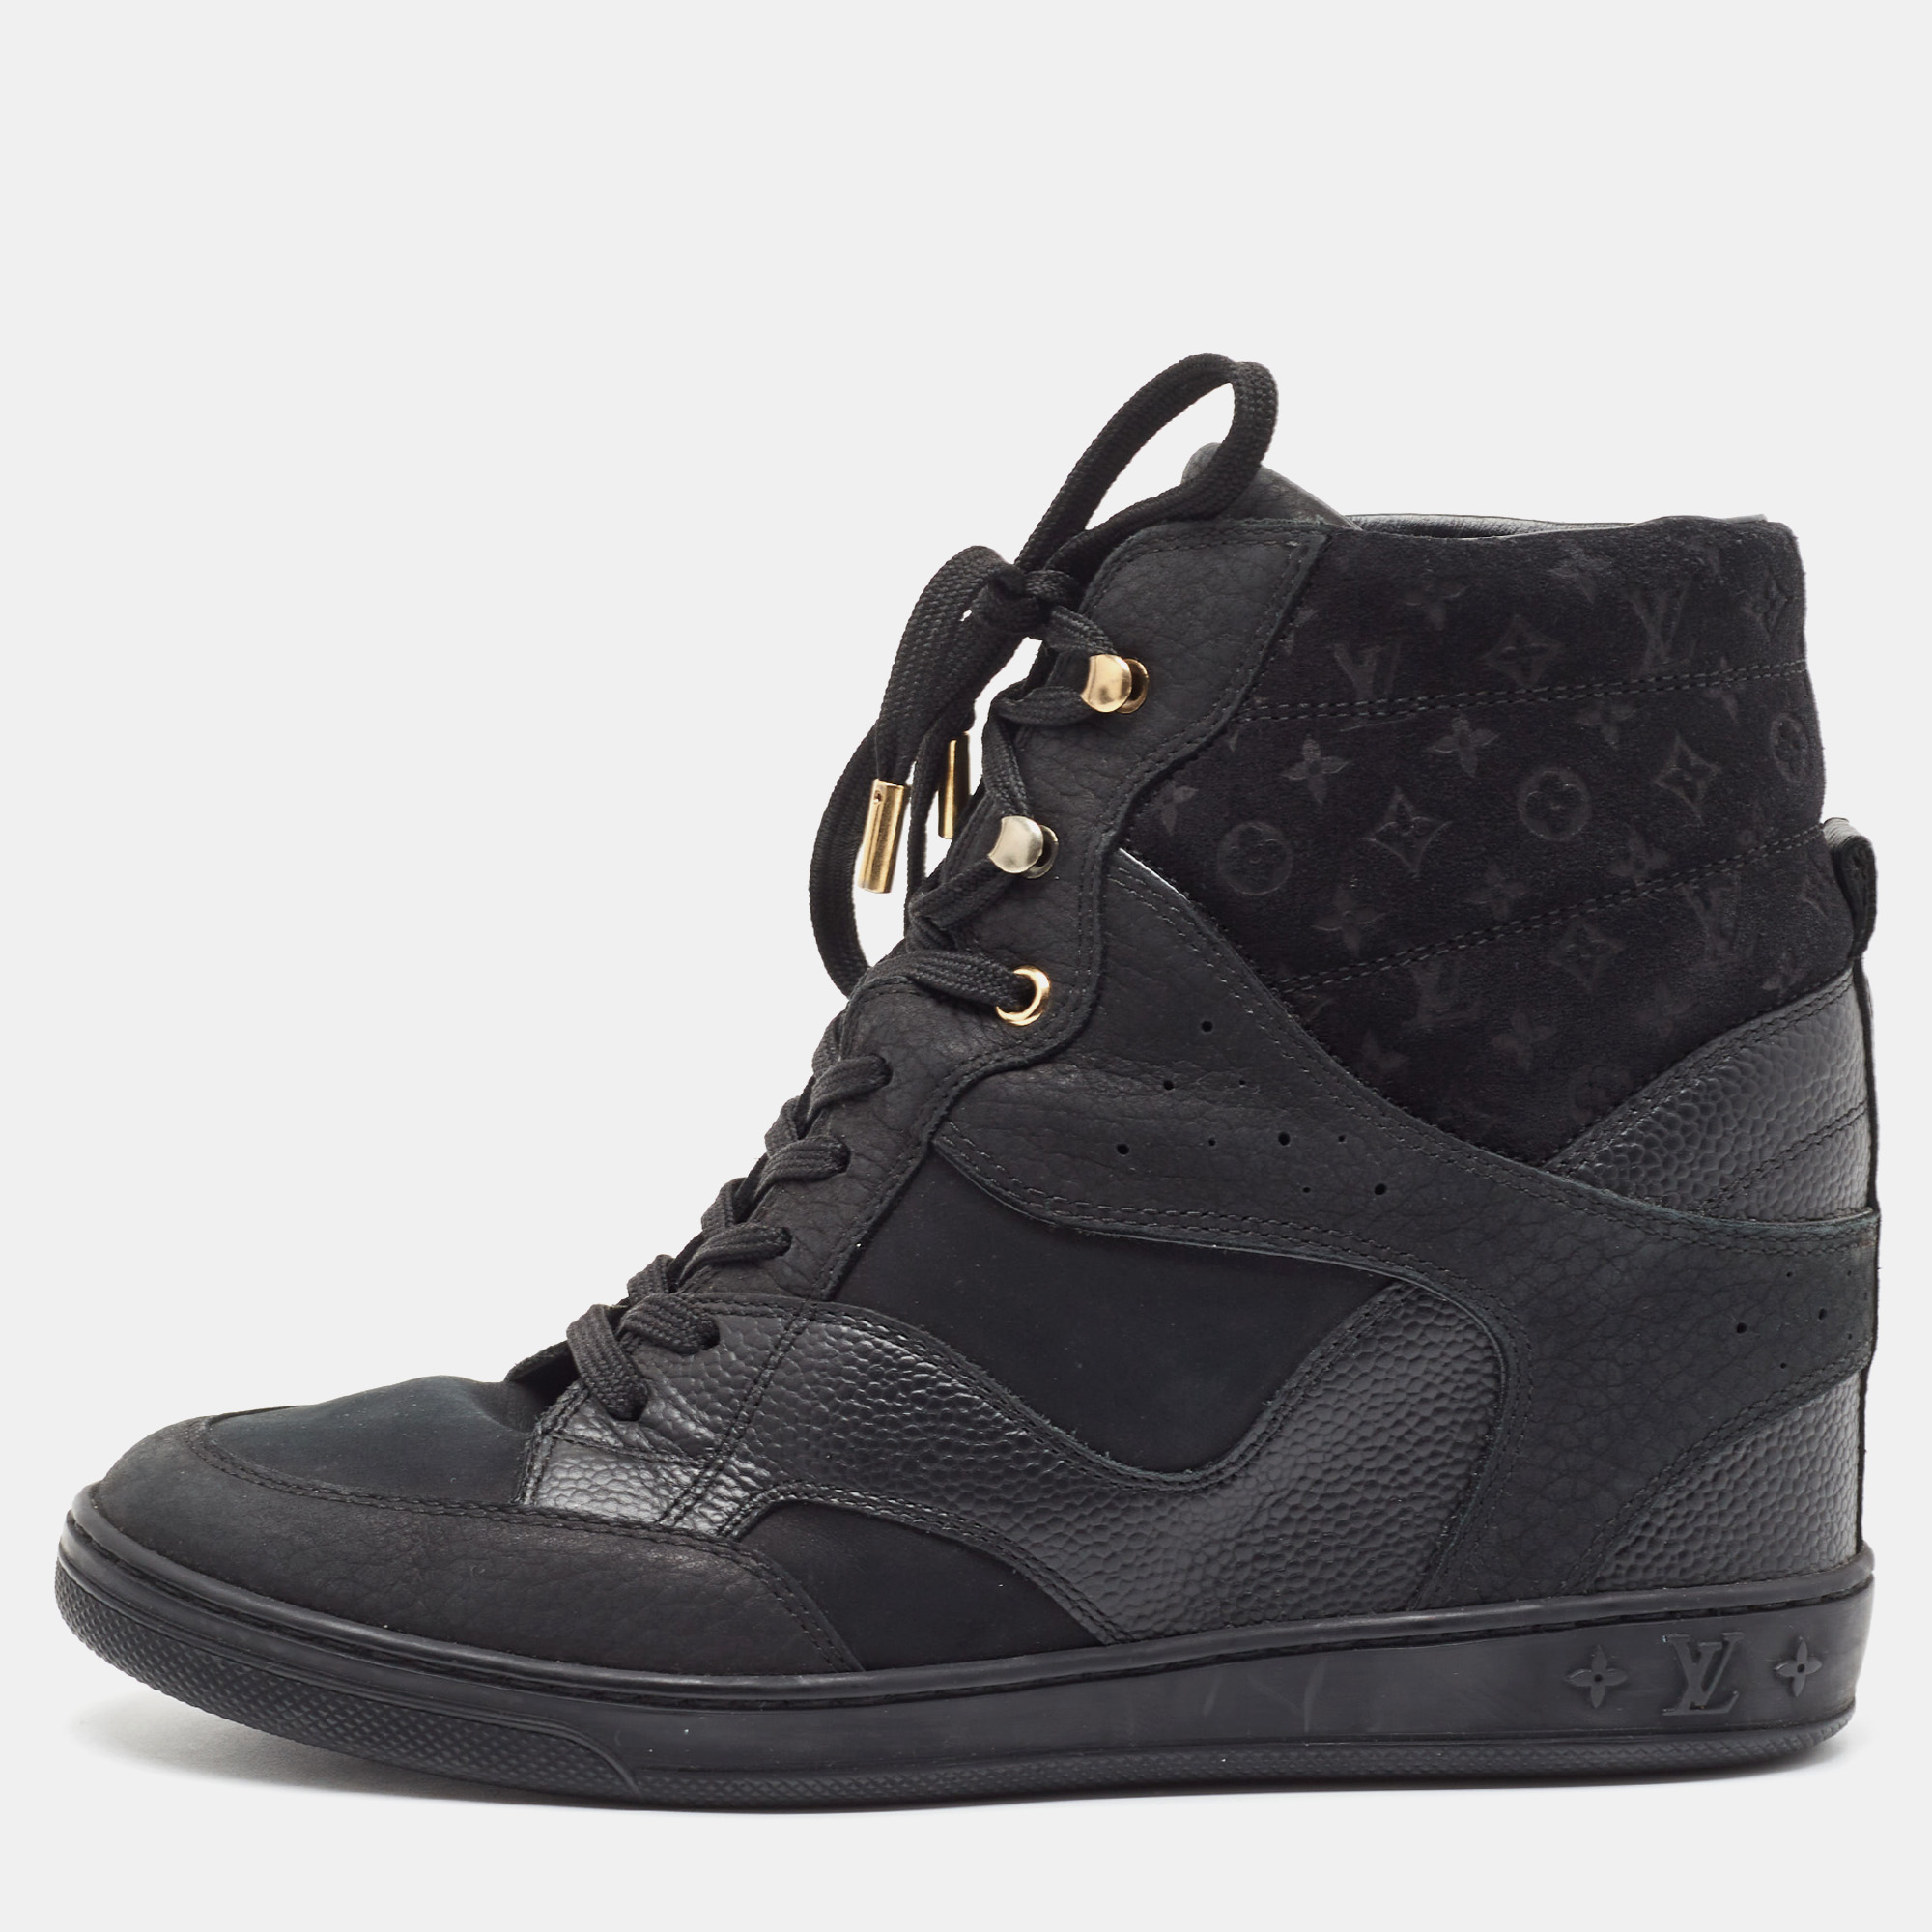 Louis Vuitton Black Nubuck Leather And Monogram Suede Cliff High Top Sneakers Size 38.5